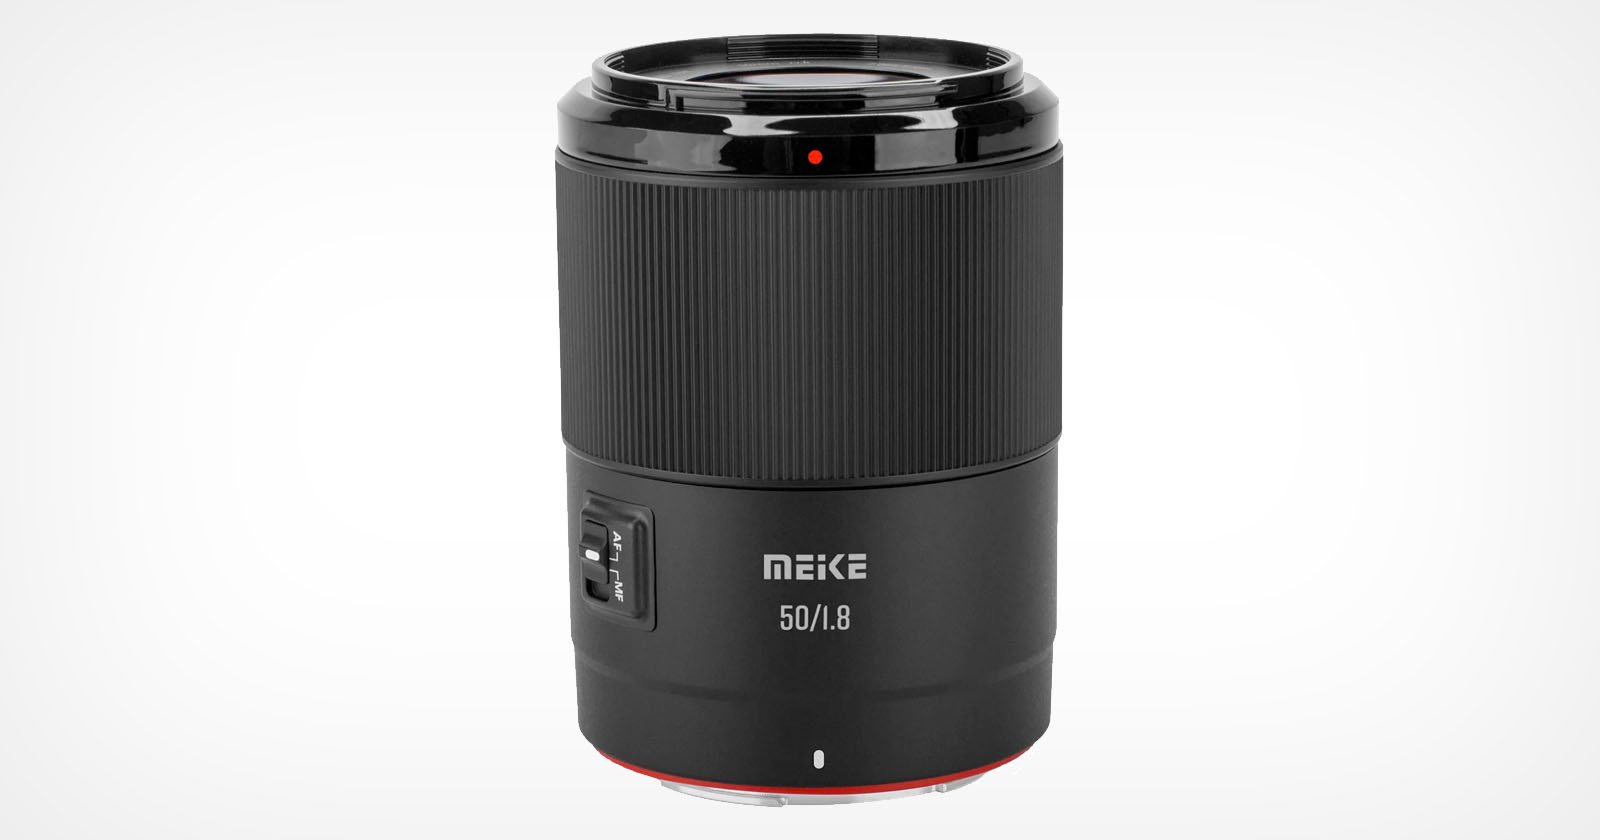 Meike to Release a 50mm f/1.8 AF Lens for Nikon Z and Sony E